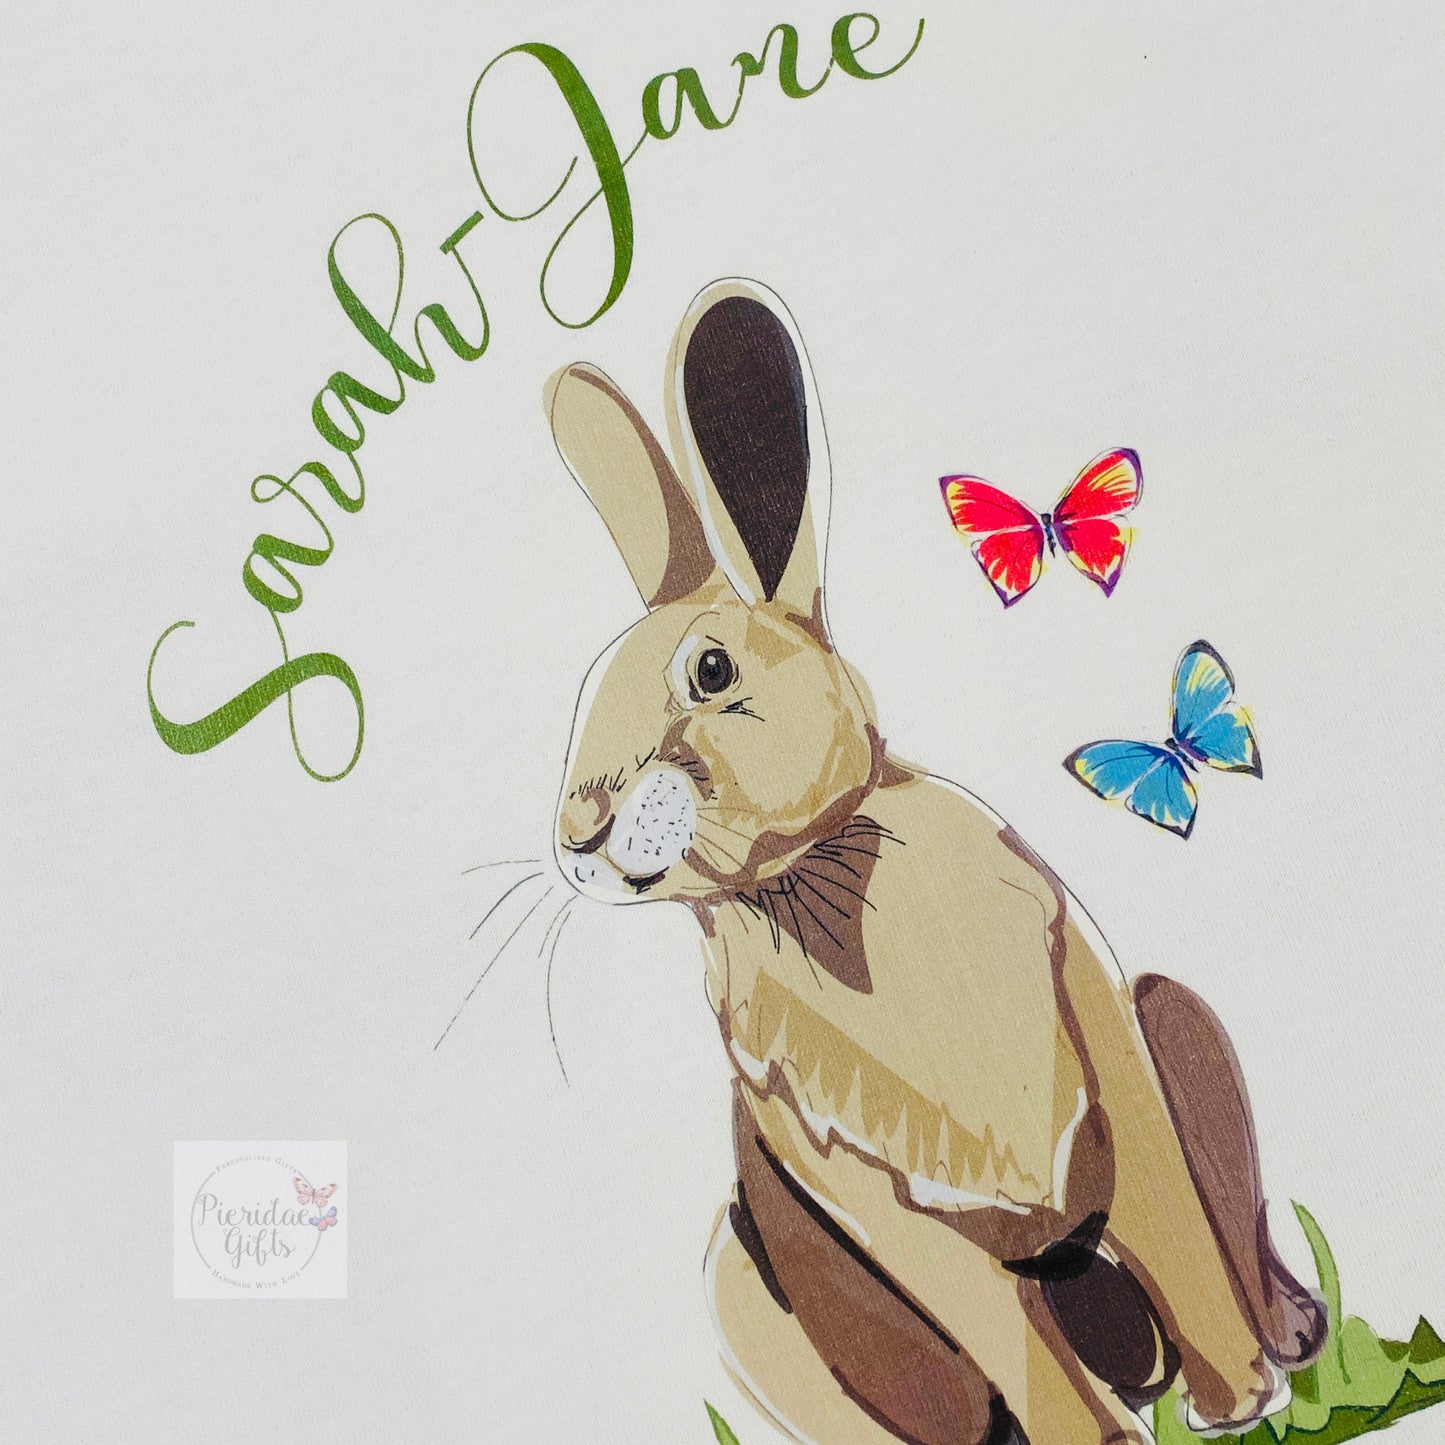 Personalised Easter Bunny T Shirt